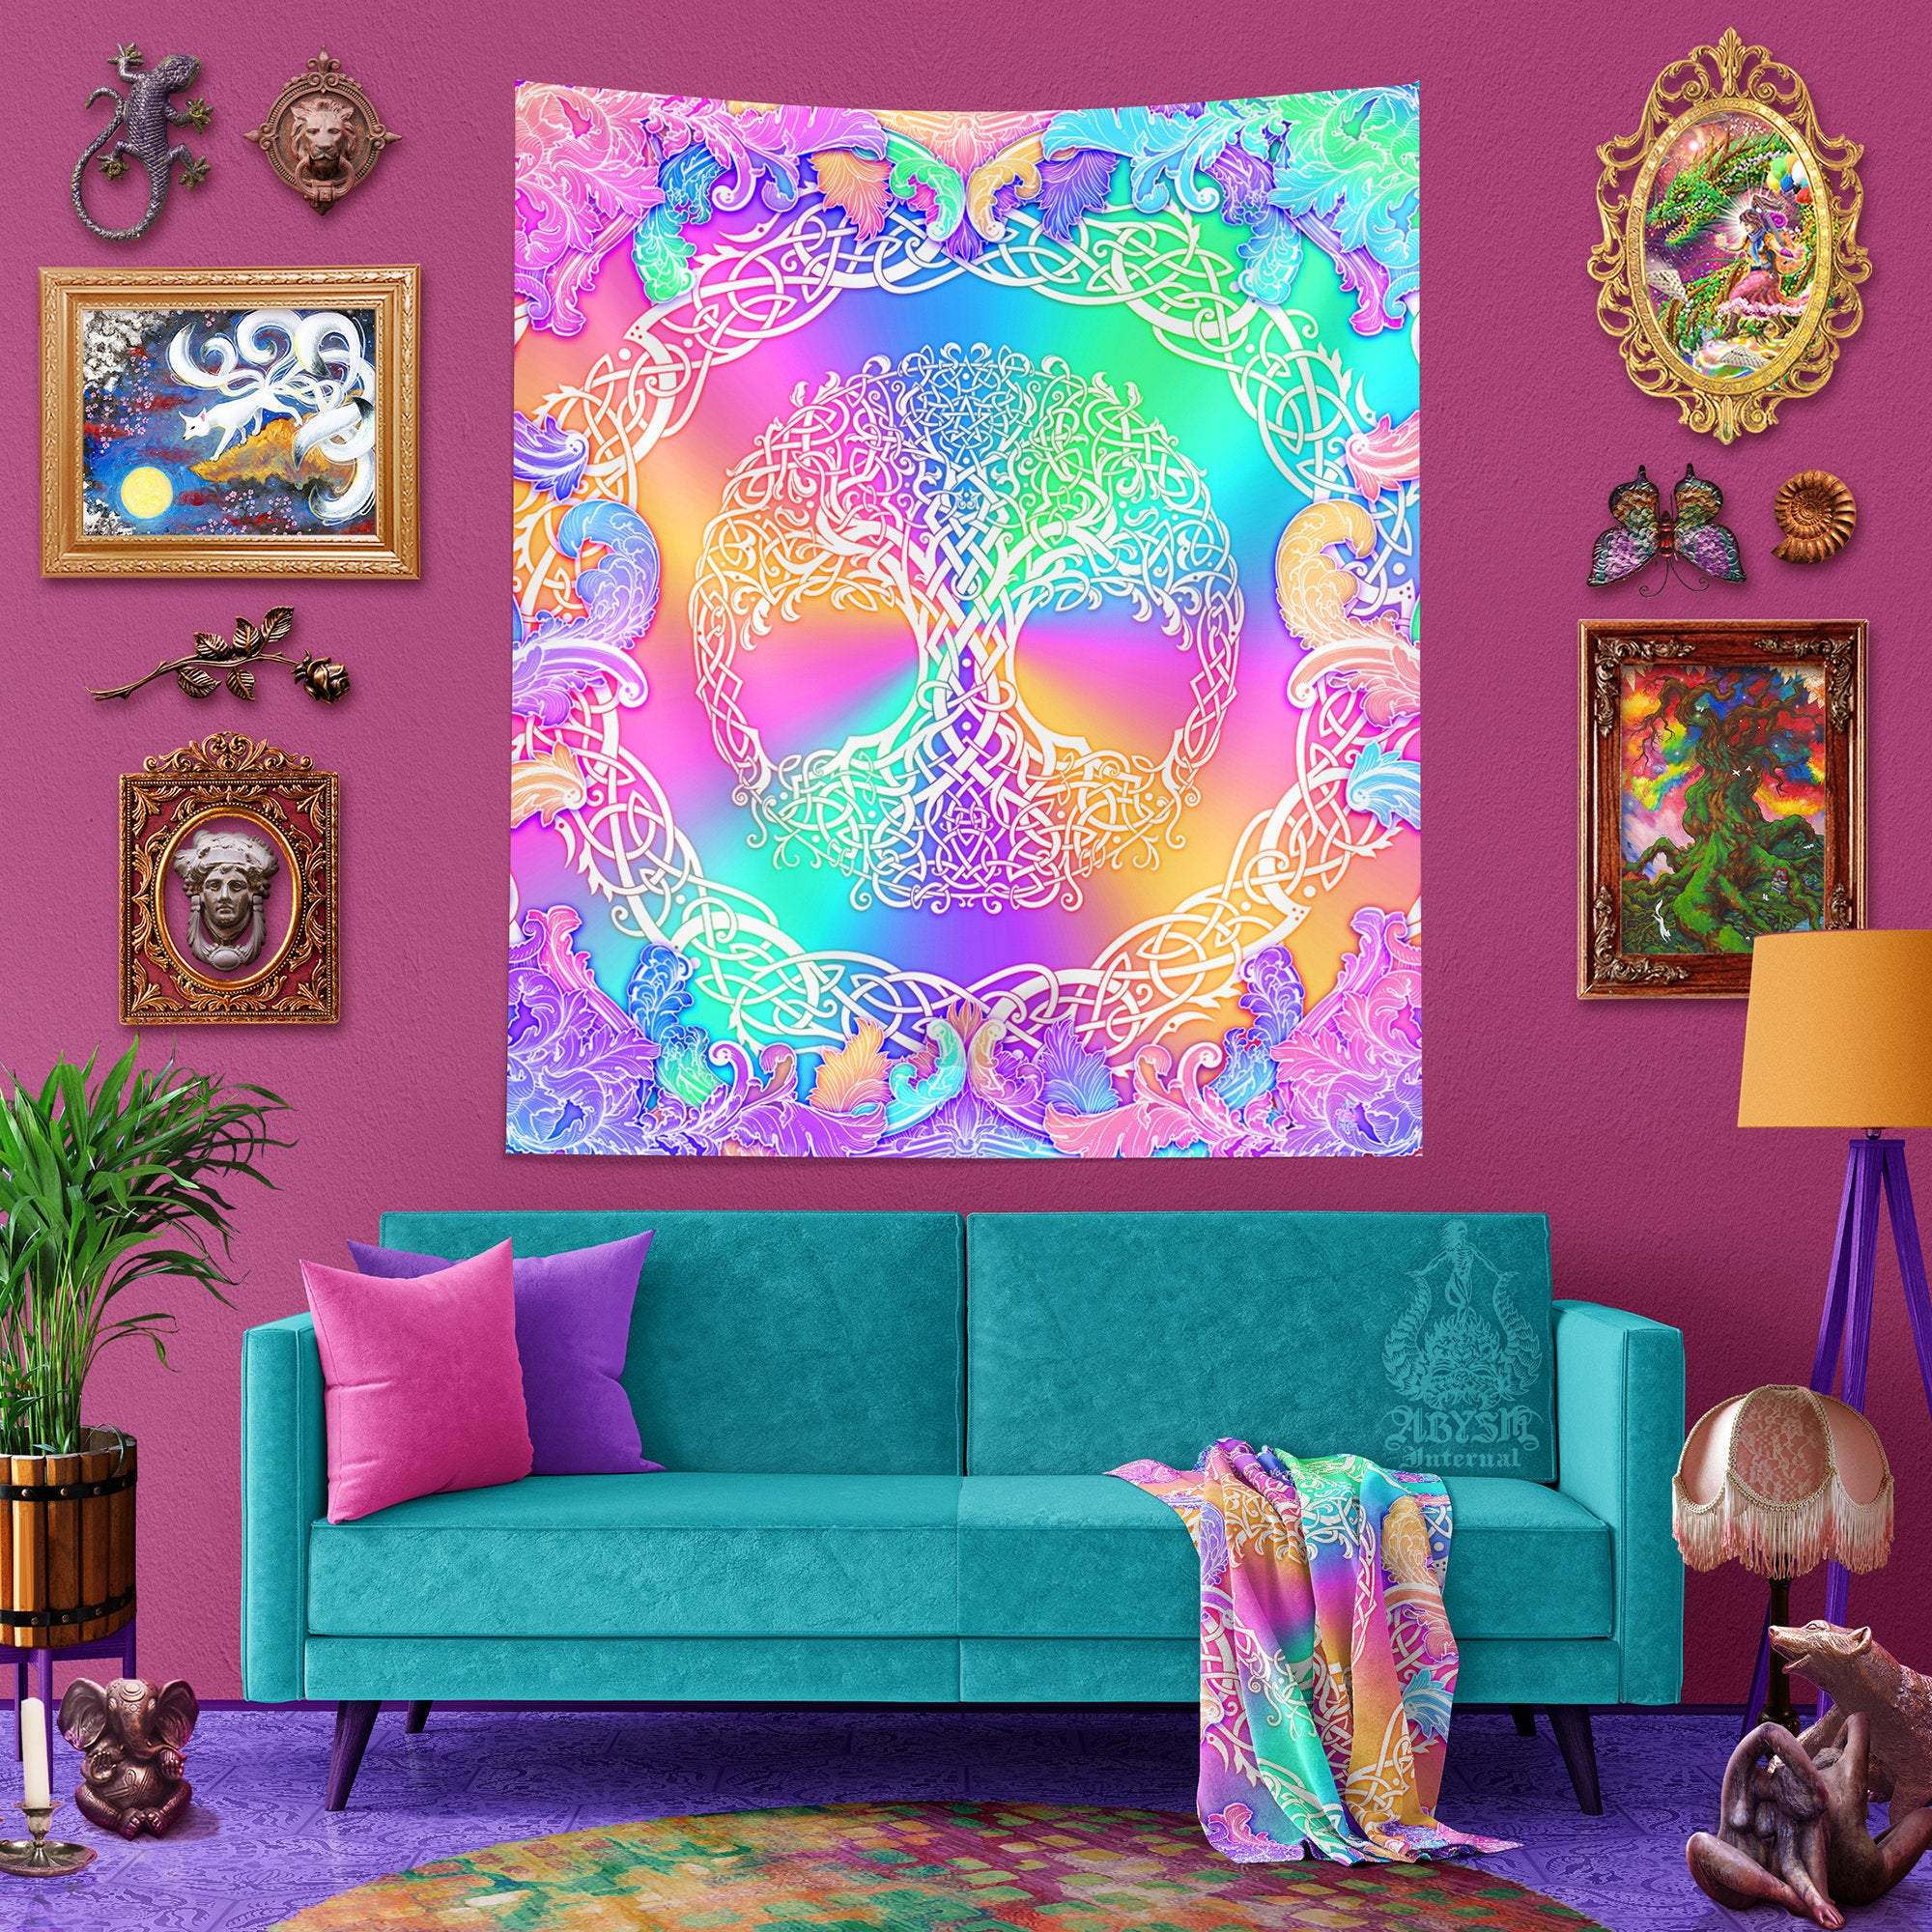 Tree of Life Tapestry, Celtic Wall Hanging, Pagan and Boho Home Decor, Art Print, Eclectic and Funky - Aesthetic, Holographic Pastel - Abysm Internal